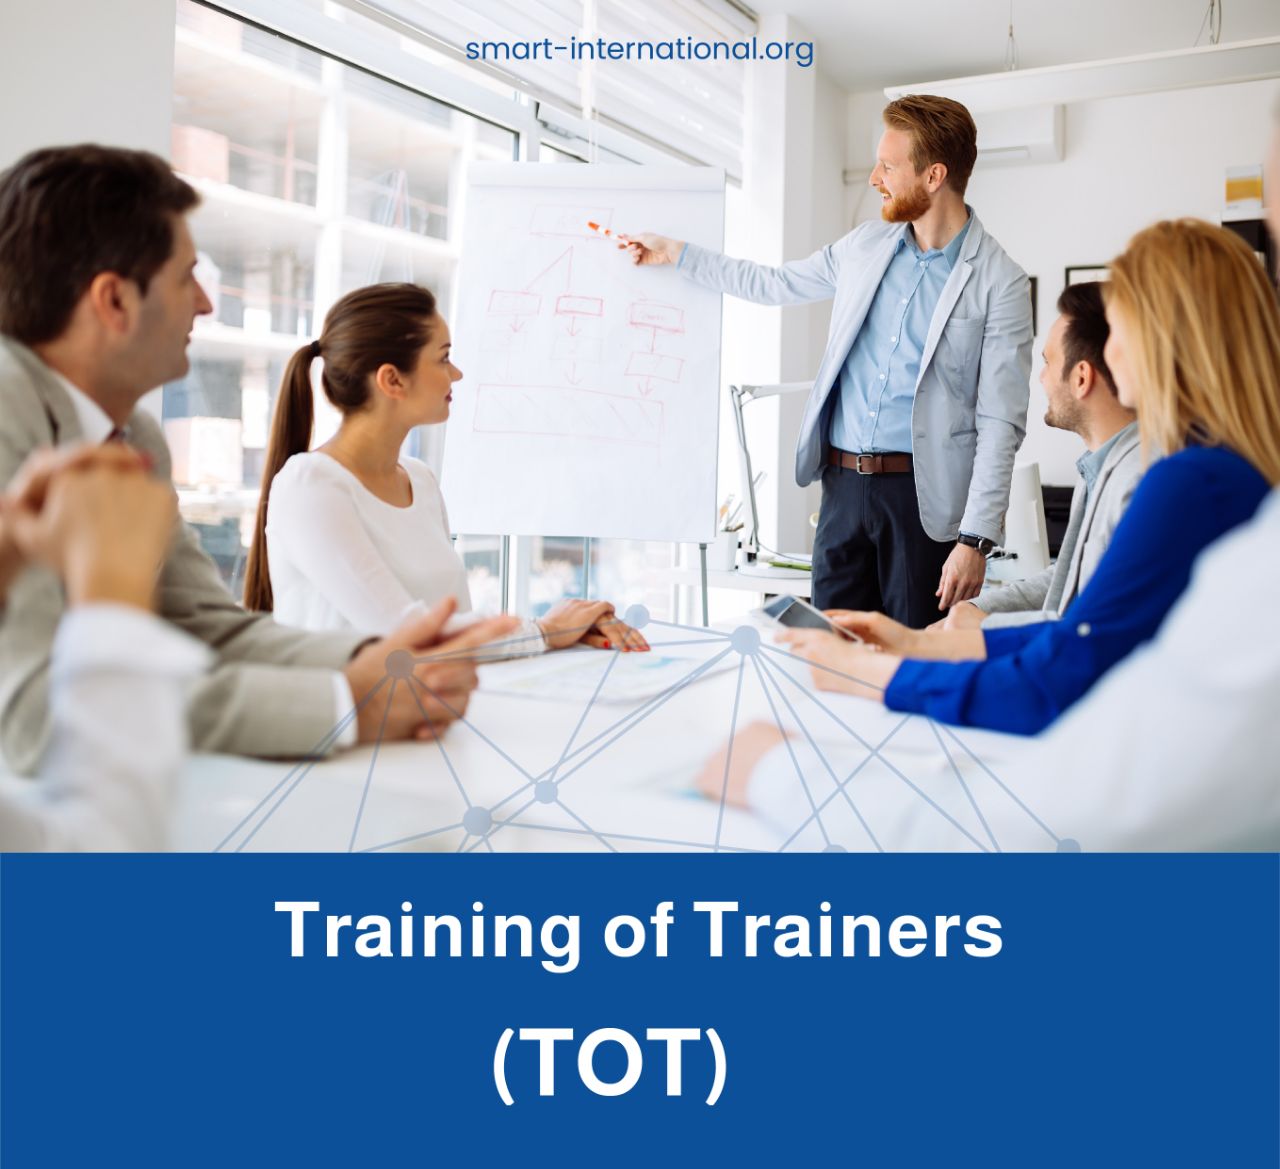 TOT - Training of Trainers